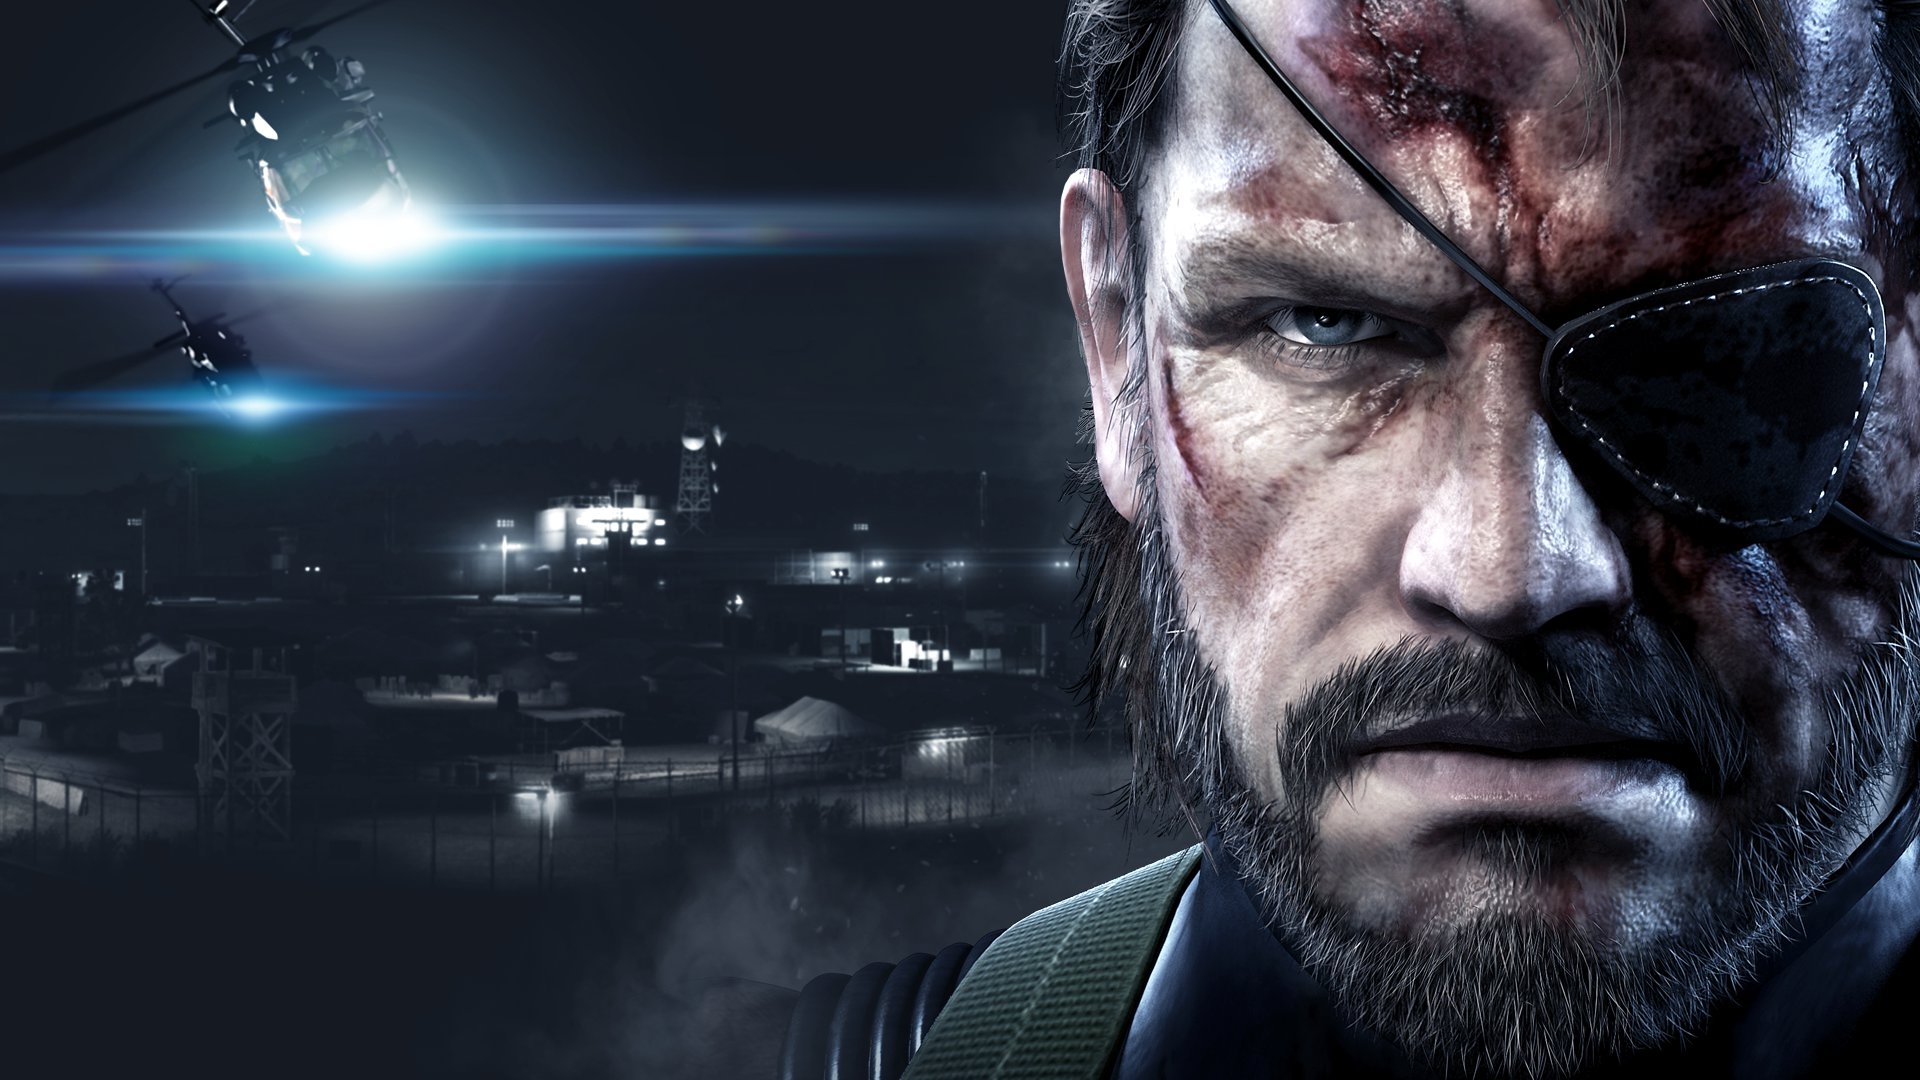 Metal Gear Solid V: Ground Zeroes Wallpaper